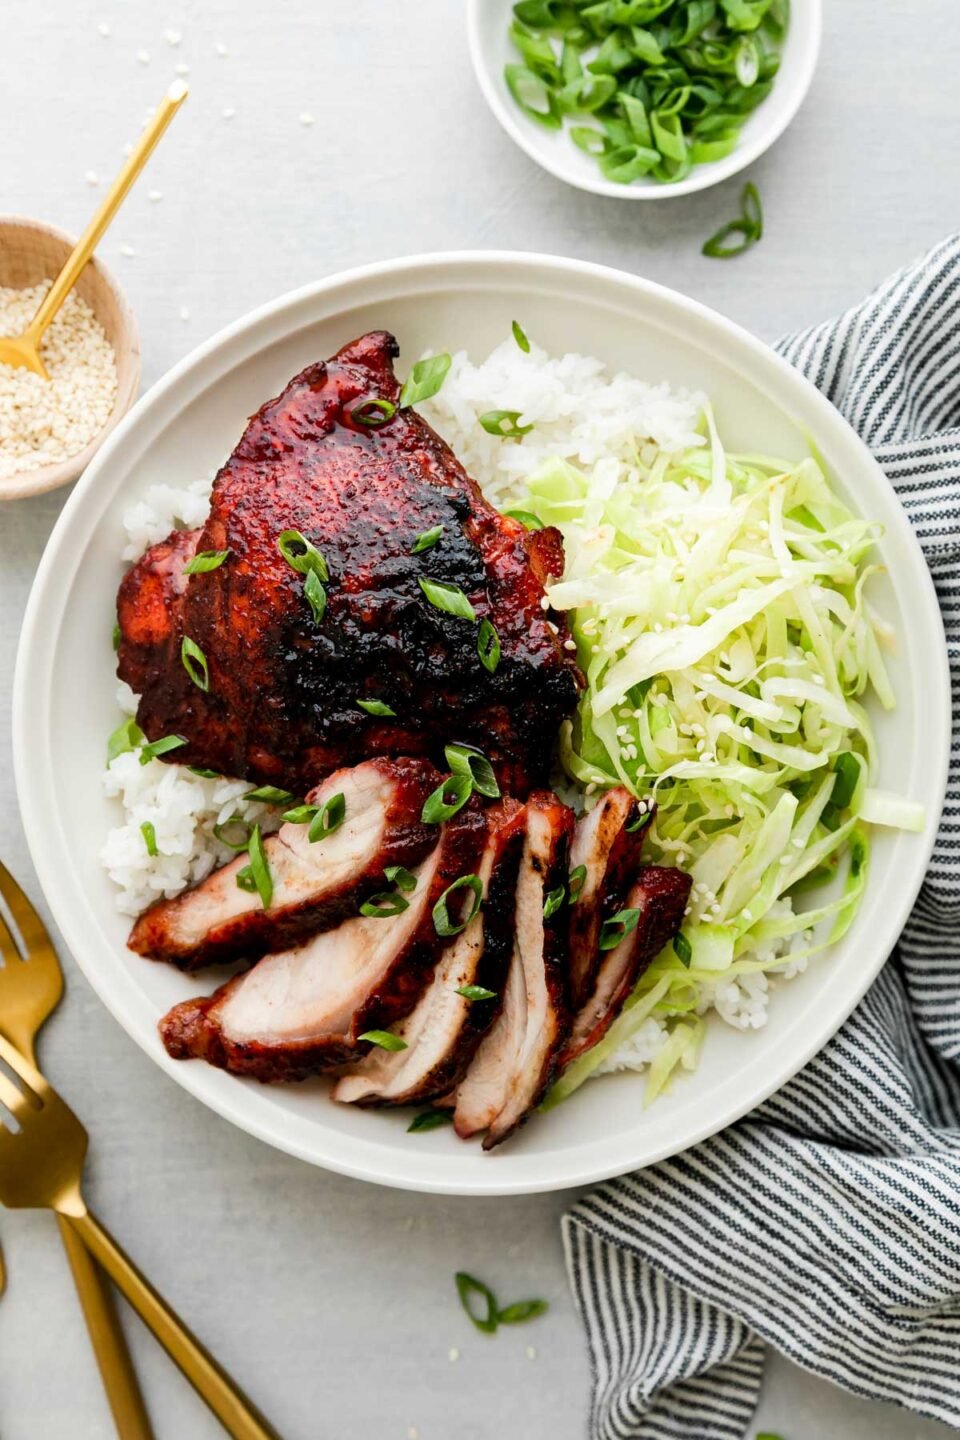 Char siu chicken served atop rice and thinly sliced and sauteed cabbage on a white ceramic plate. The plate sits atop a creamy white textured surface surrounded by a blue and white linen napkin, a small white ceramic bowl filled with thinly sliced green onion, a small wooden pinch bowl filled with sesame seeds with a small gold spoon resting inside, and two gold forks surround the bowl at center.